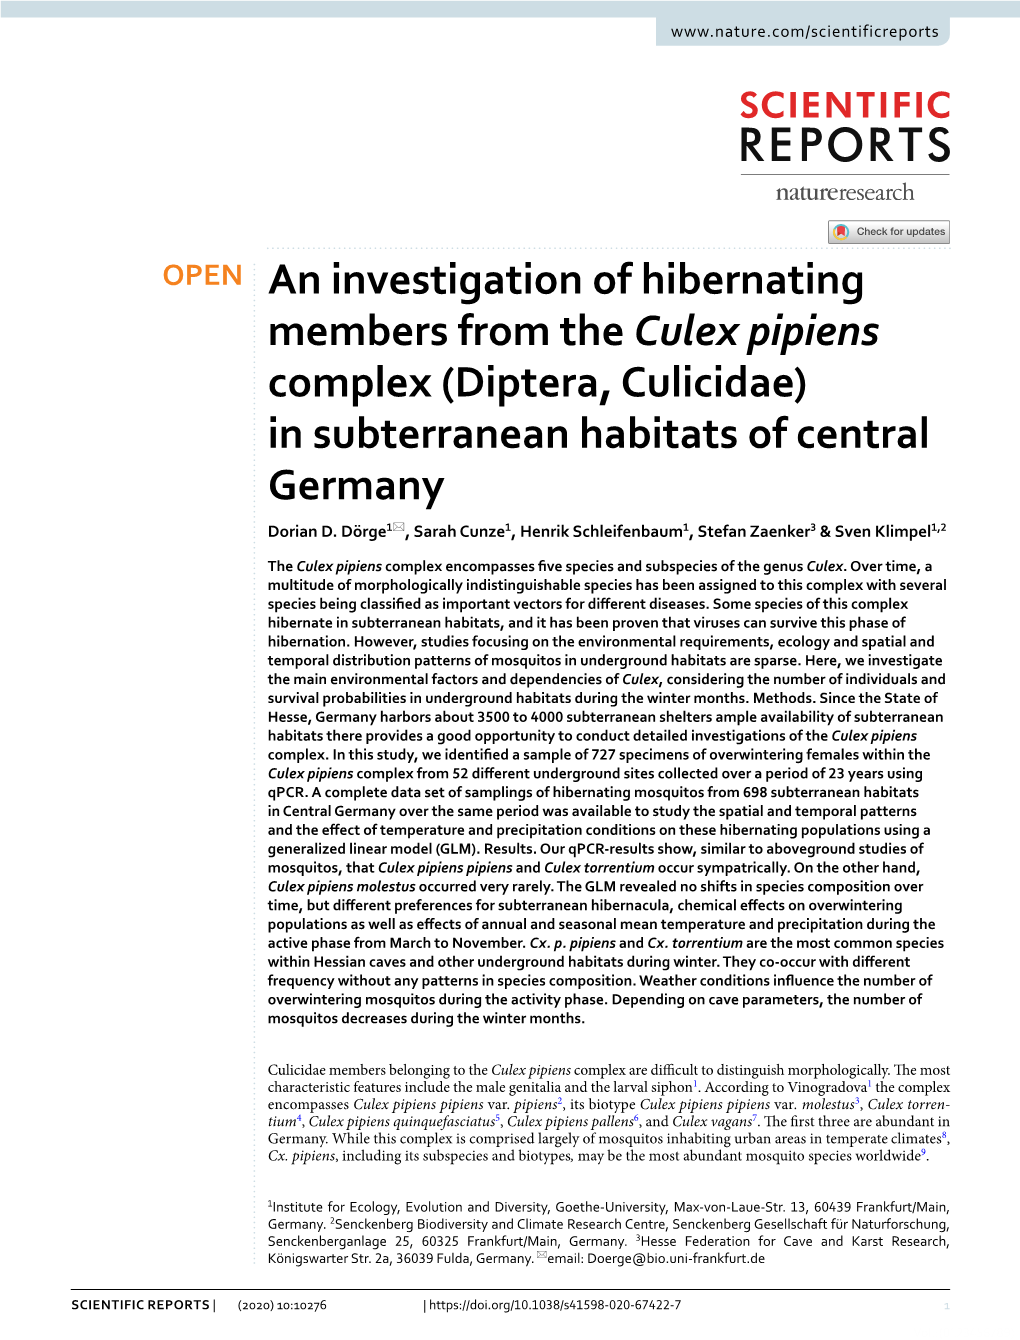 An Investigation of Hibernating Members from the Culex Pipiens Complex (Diptera, Culicidae) in Subterranean Habitats of Central Germany Dorian D